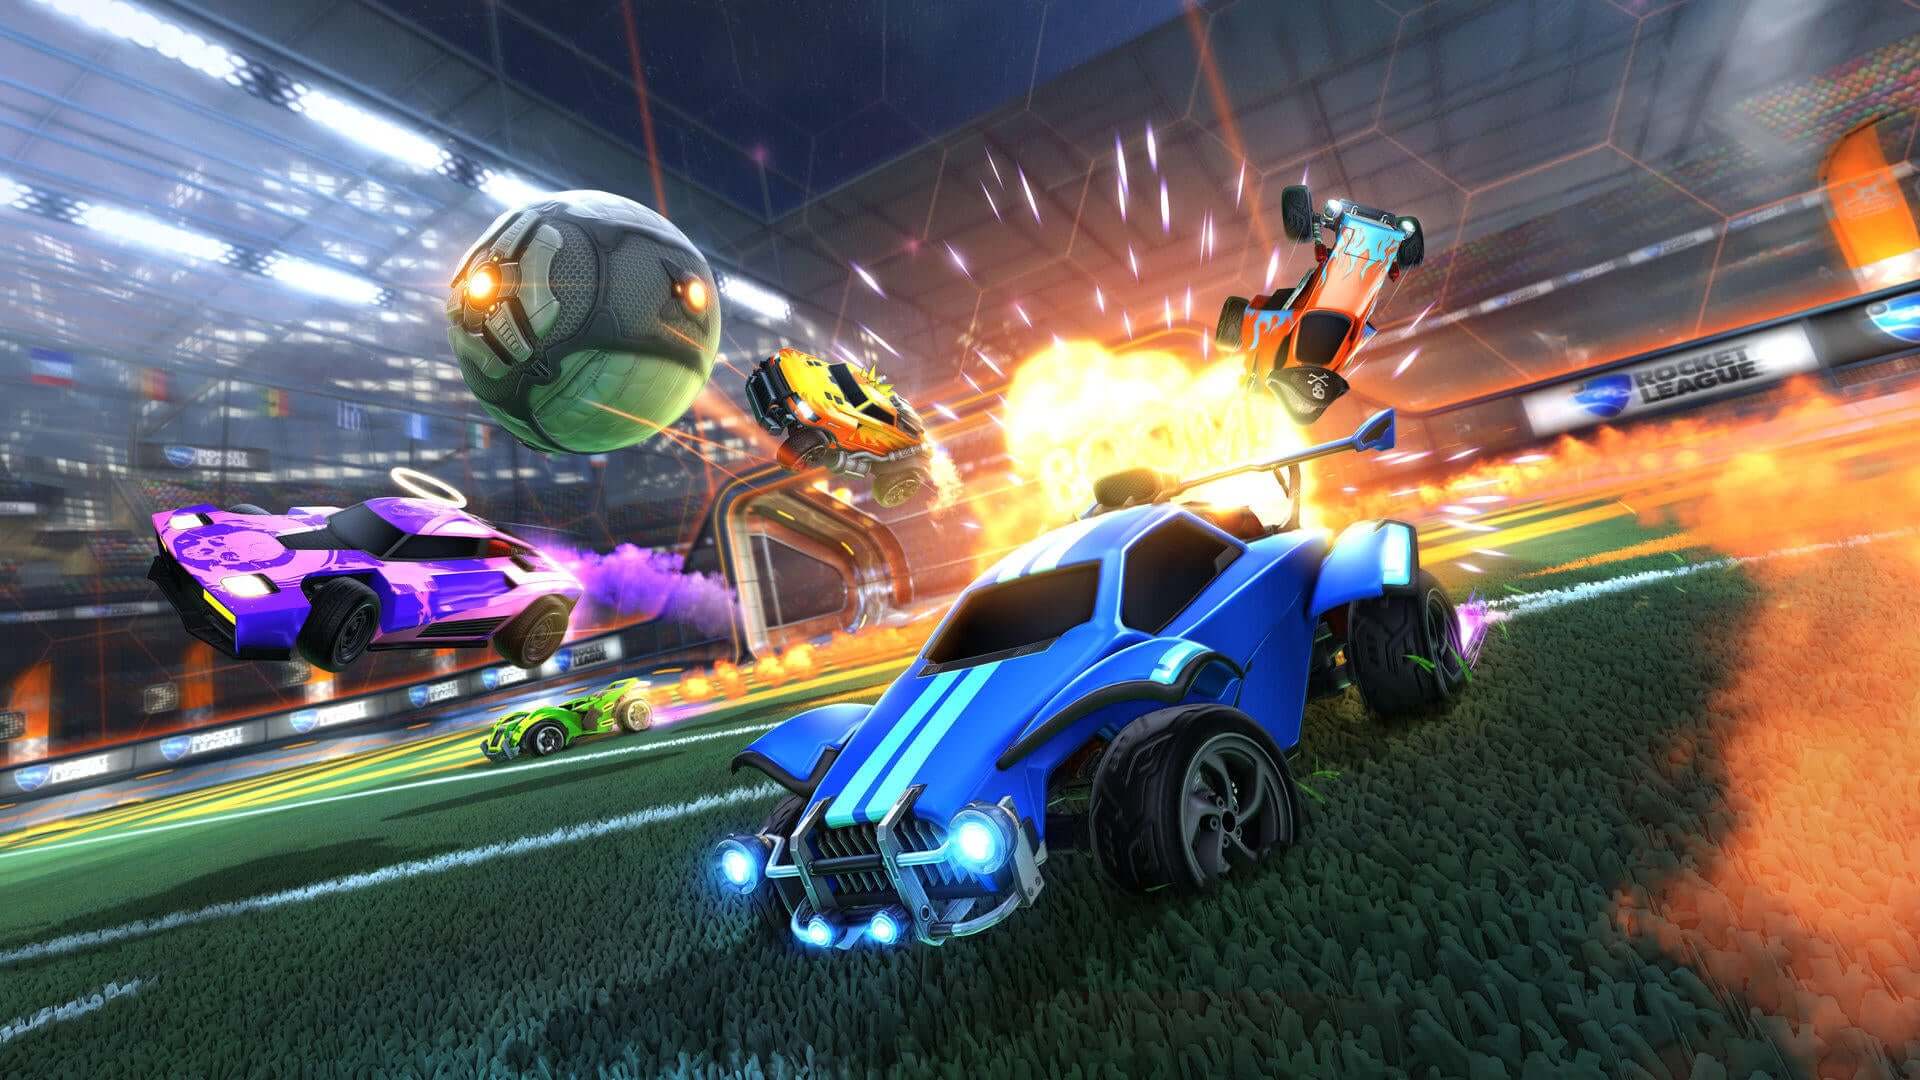 Rocket League, a game powered by Epic Online Services